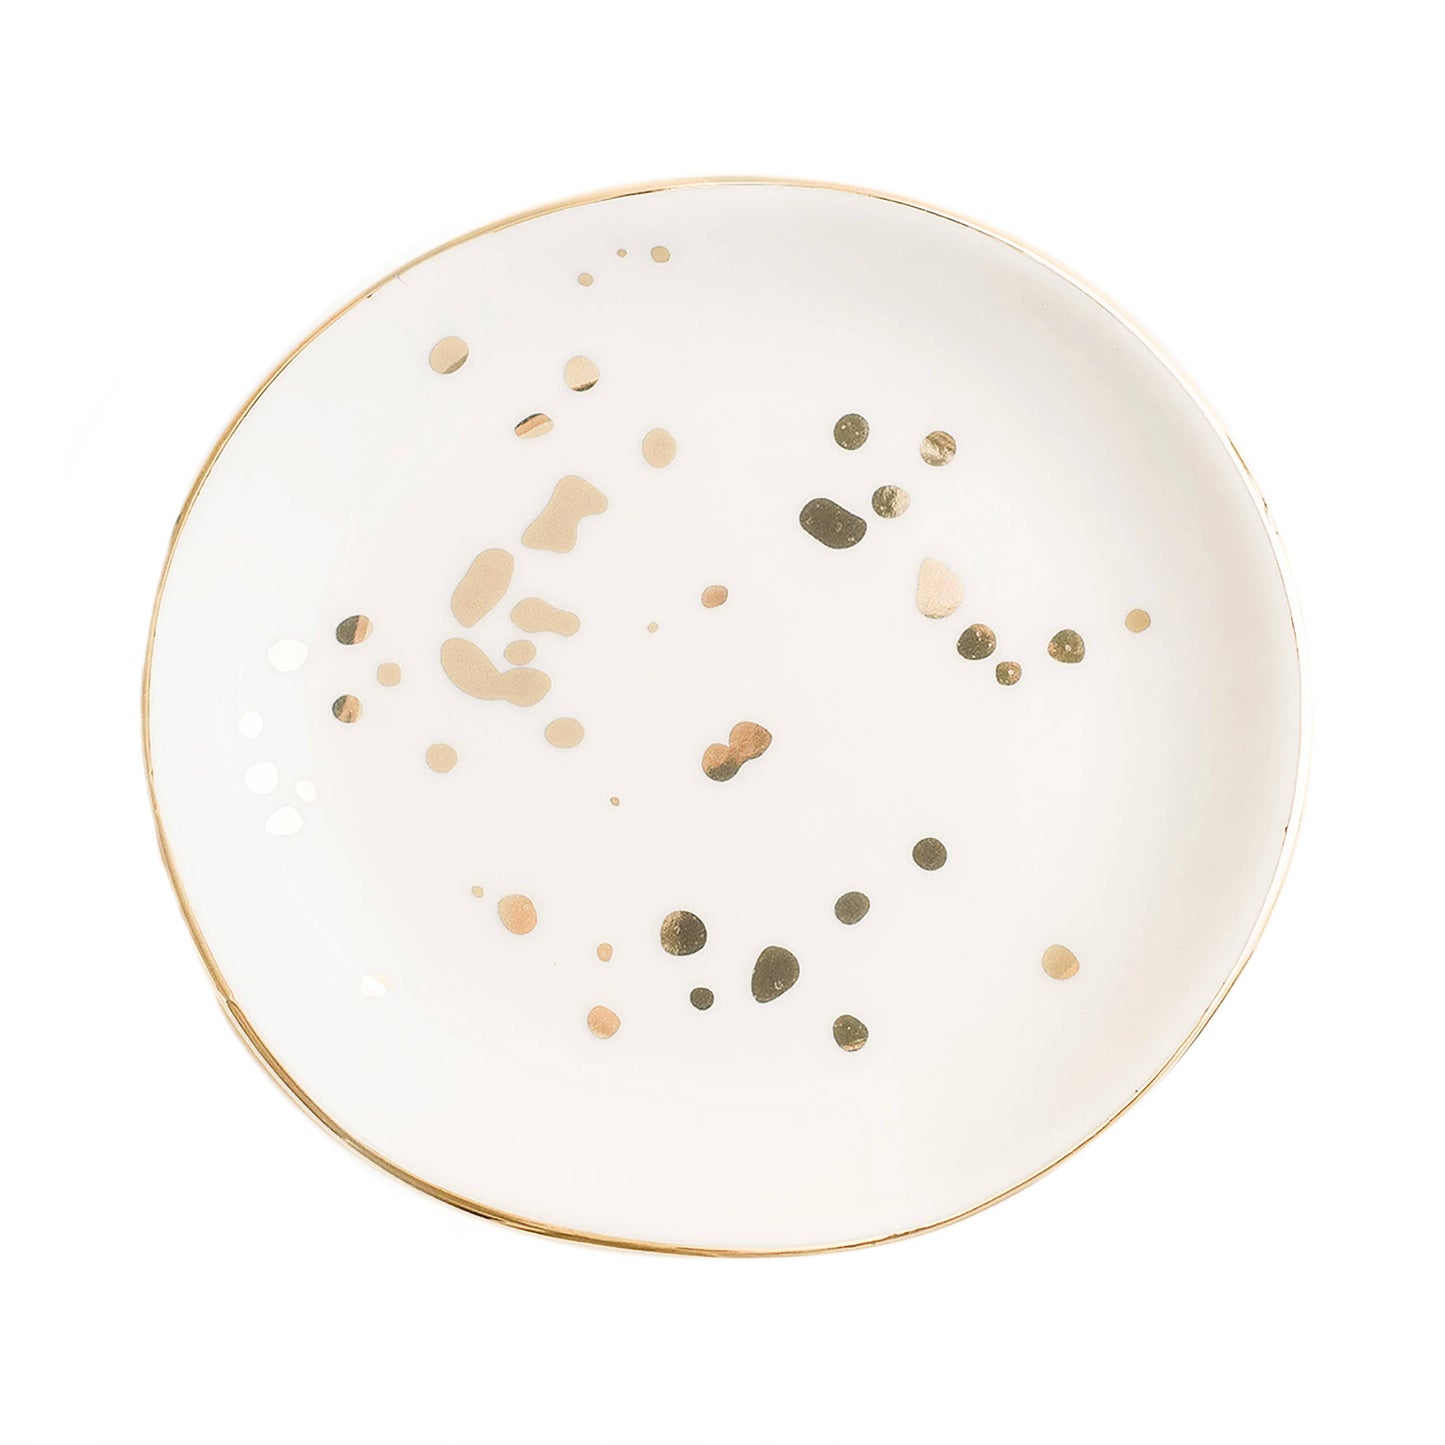 Speckled Jewelry Dish - White and Gold Foil